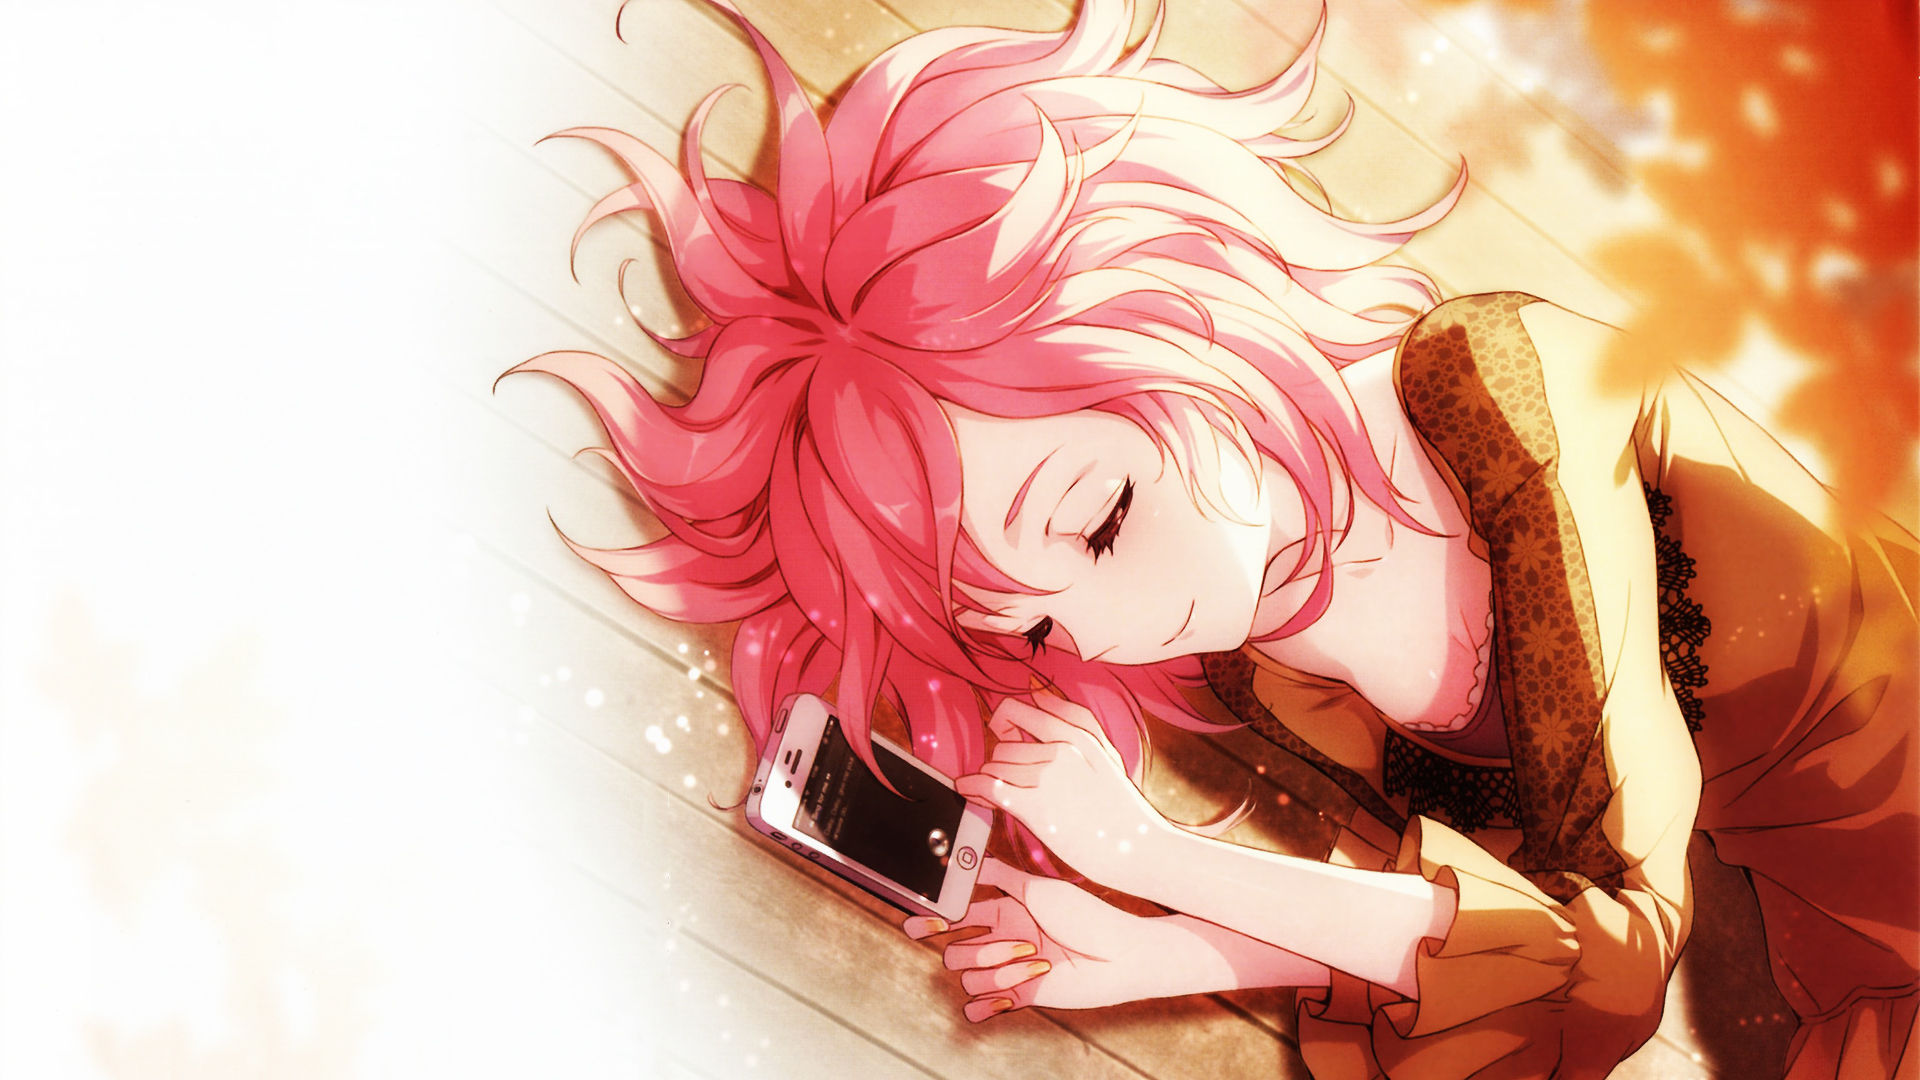 Interesting Anime Hdq Images Collection - Anime Girl Sleeping - HD Wallpaper 